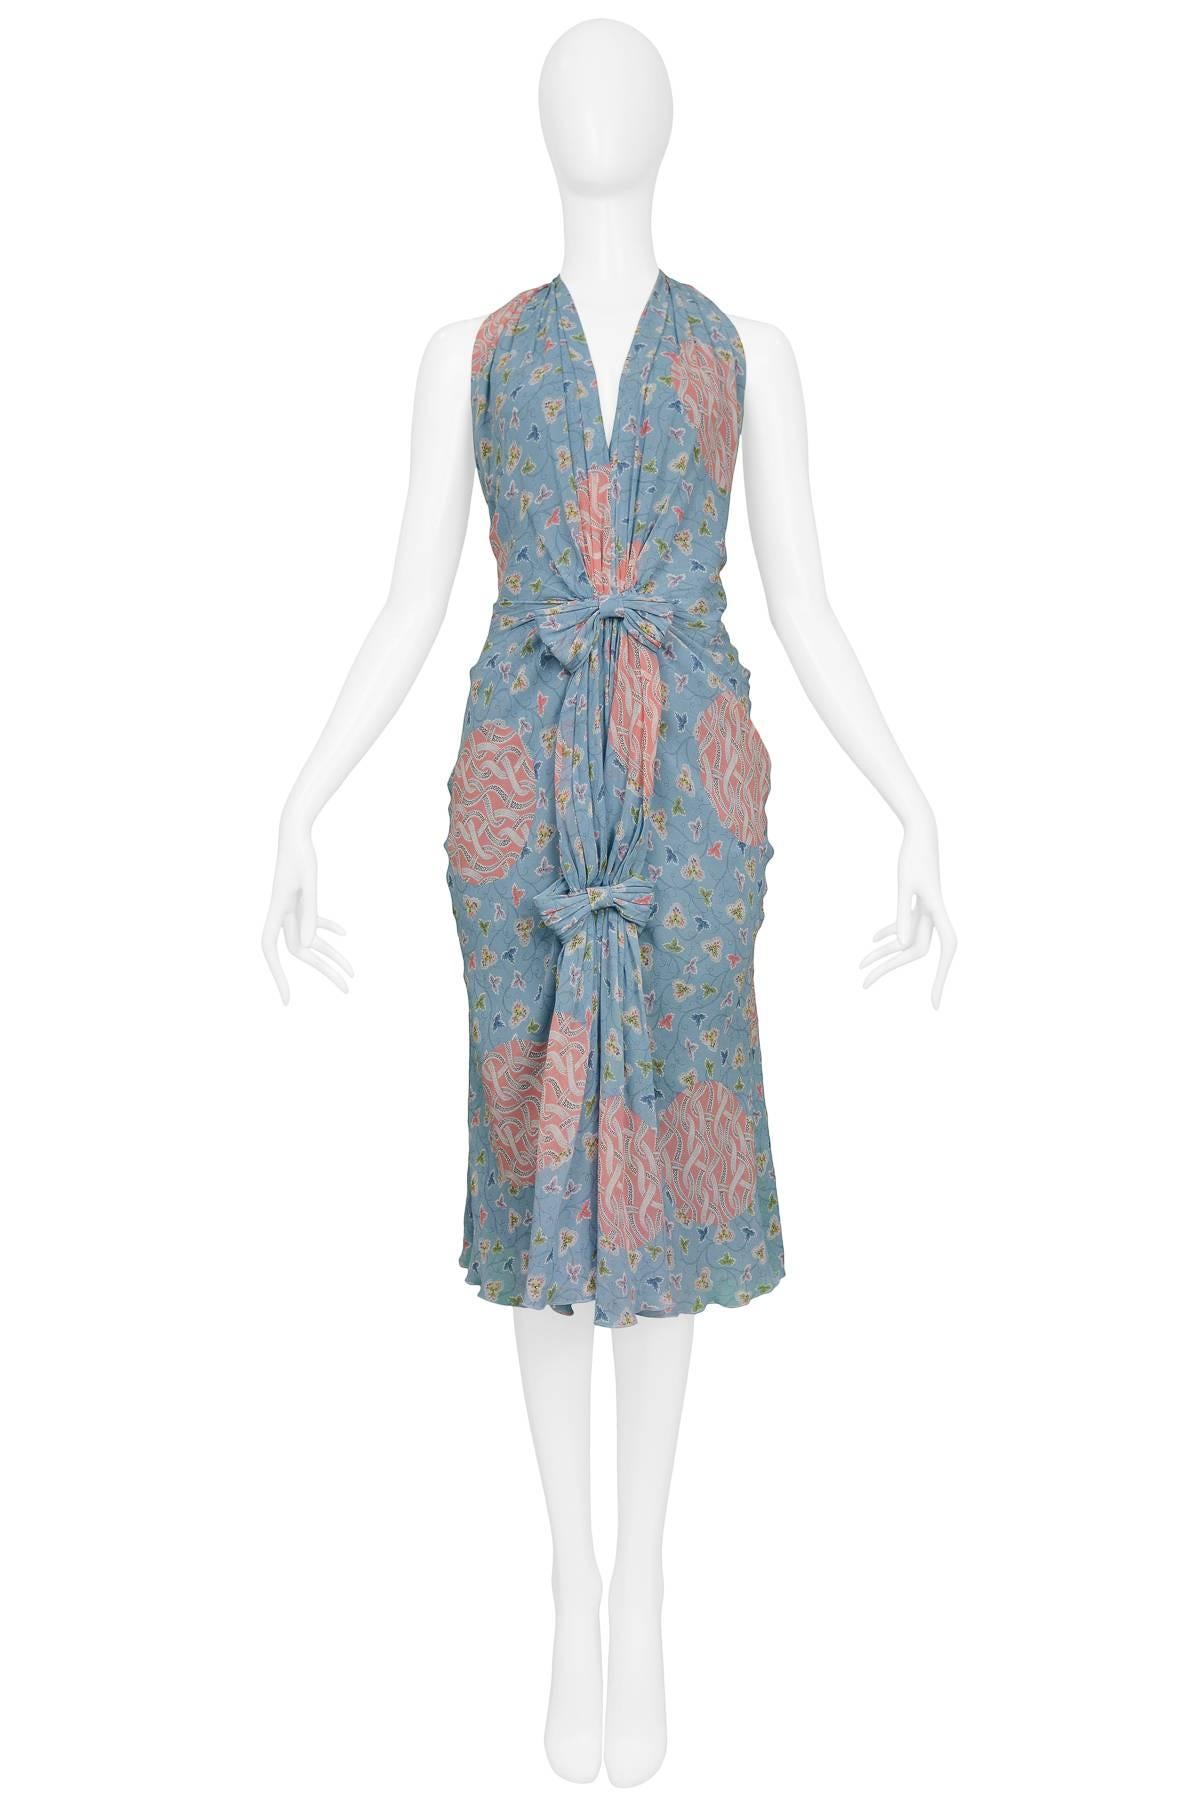 CHRISTIAN DIOR
BLUE AND MAUVE FLORAL PRINT HALTER DRESS
Condition : Excellent Vintage Condition
Size : 36

Christian Dior by John Galliano Pleated Fan Dress w Halter Neck & Open Back. Dress features light blue background with pink floral print,